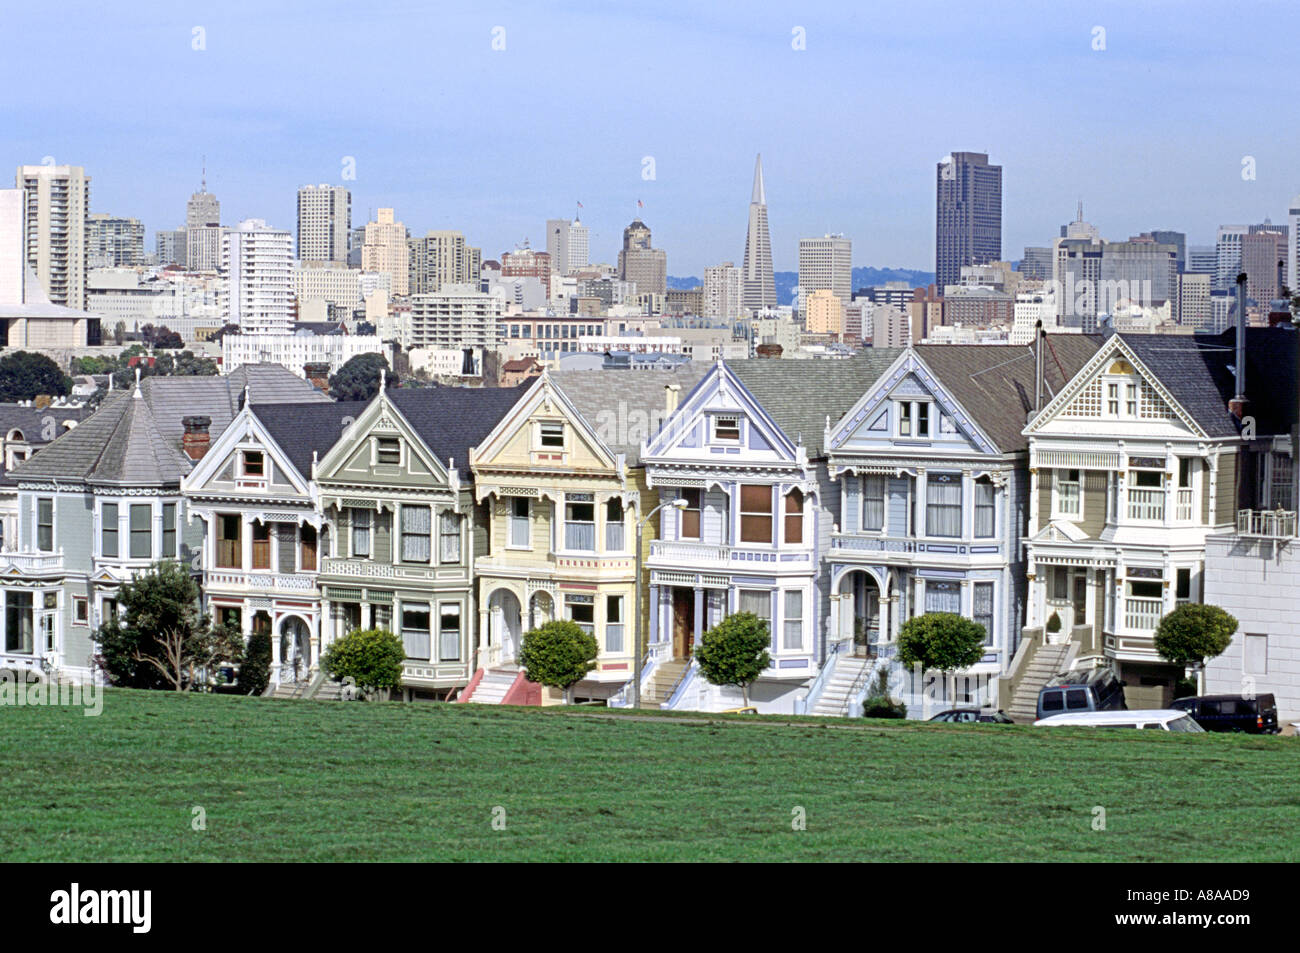 'Postcard row', a row of Victorian houses also known as The Painted Ladies in Alamo Square in the suburbs of San Francisco. Stock Photo